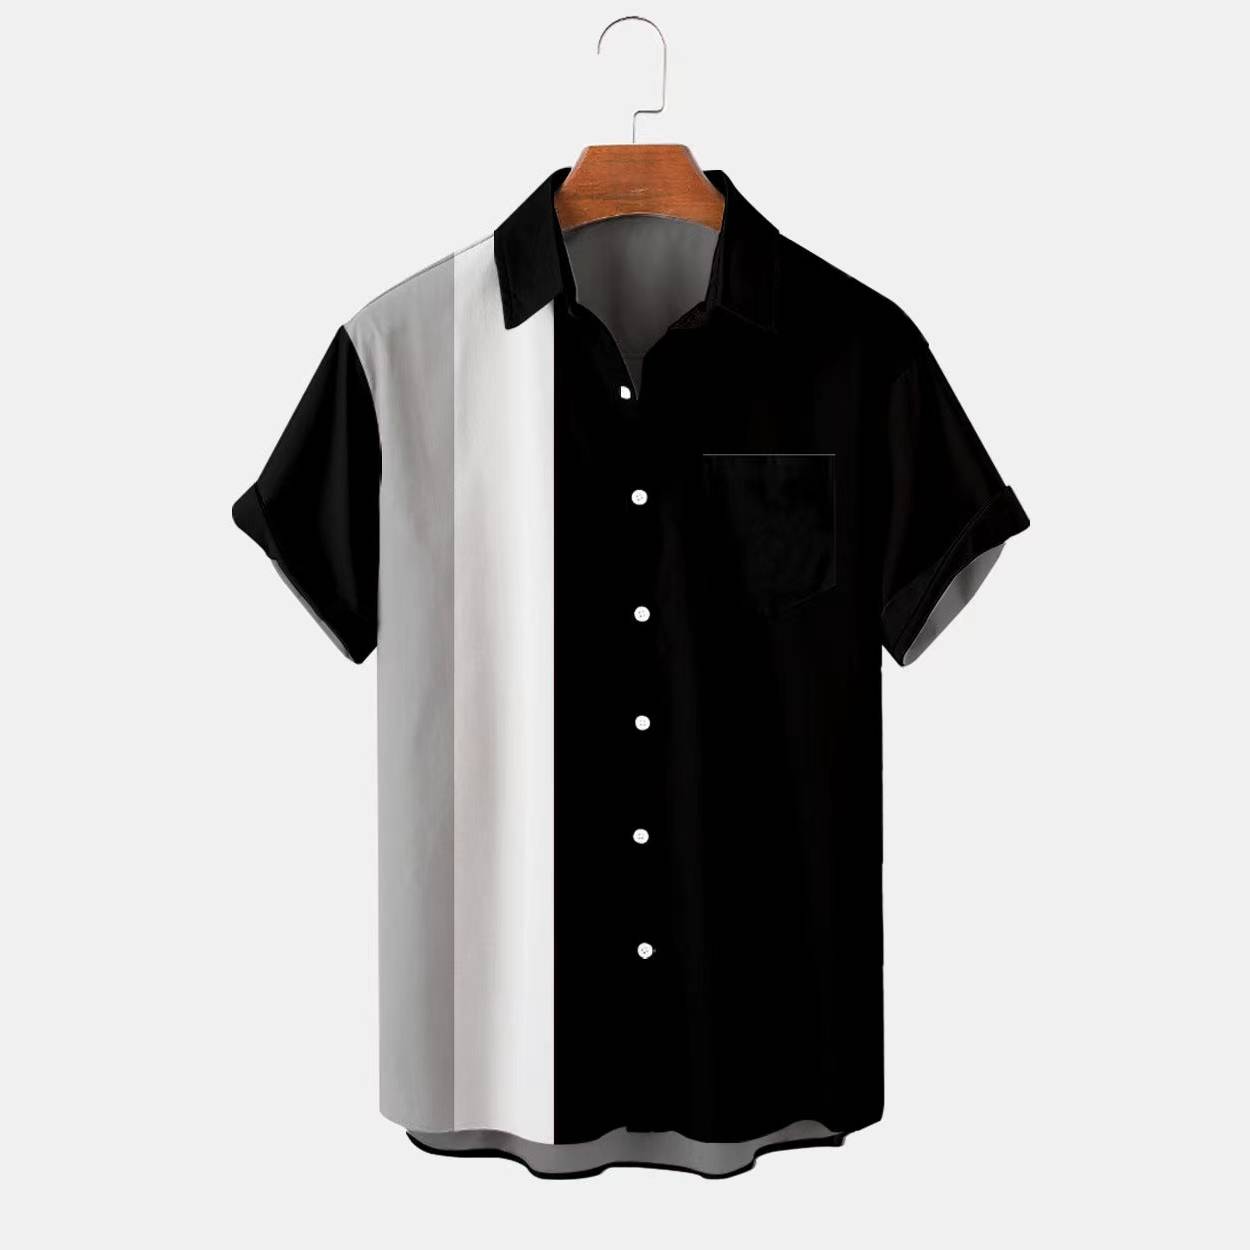 Black and White Elements Classic Casual Shirt for Men